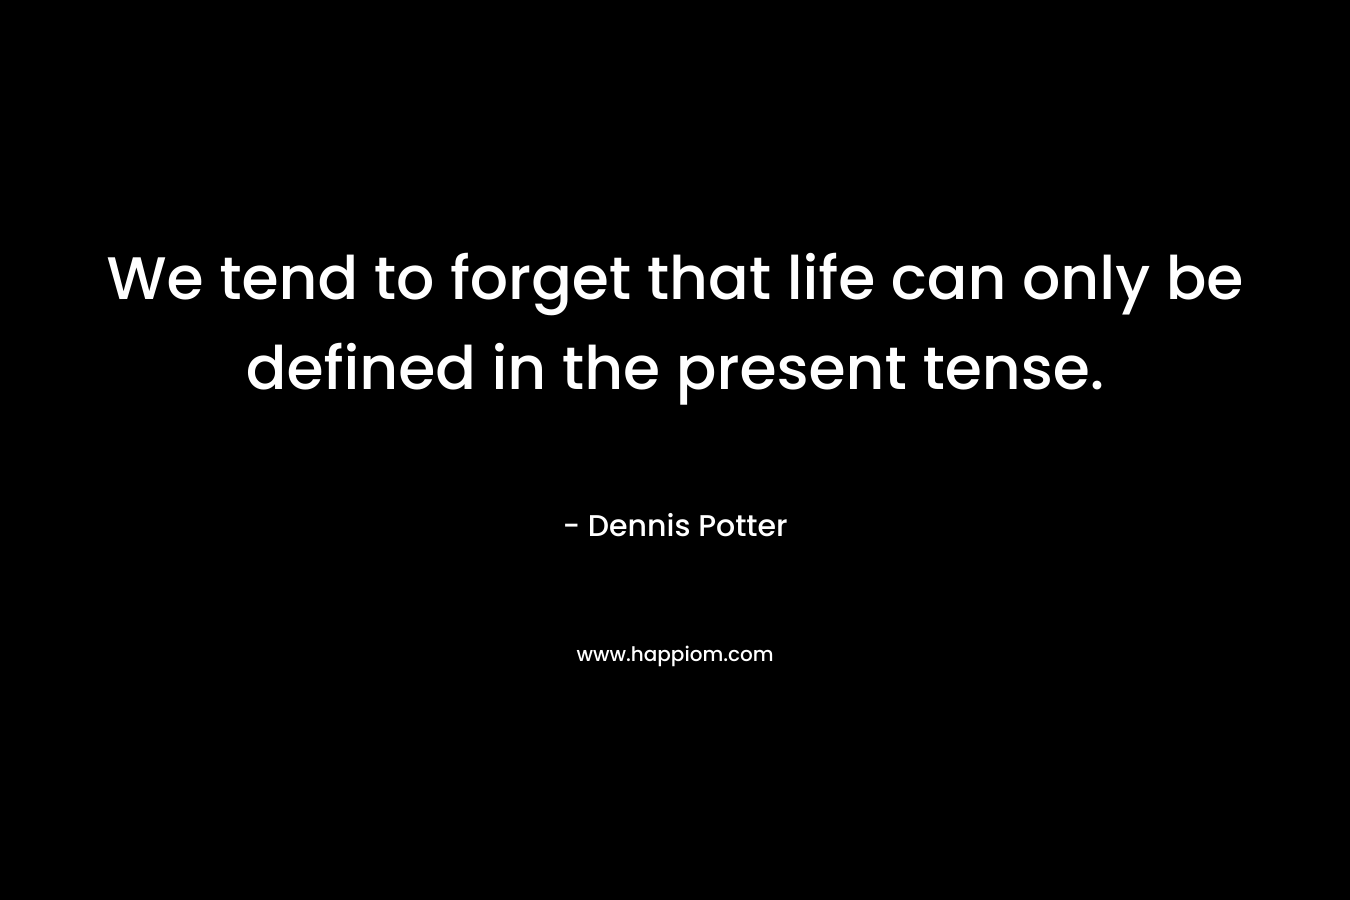 We tend to forget that life can only be defined in the present tense. – Dennis Potter